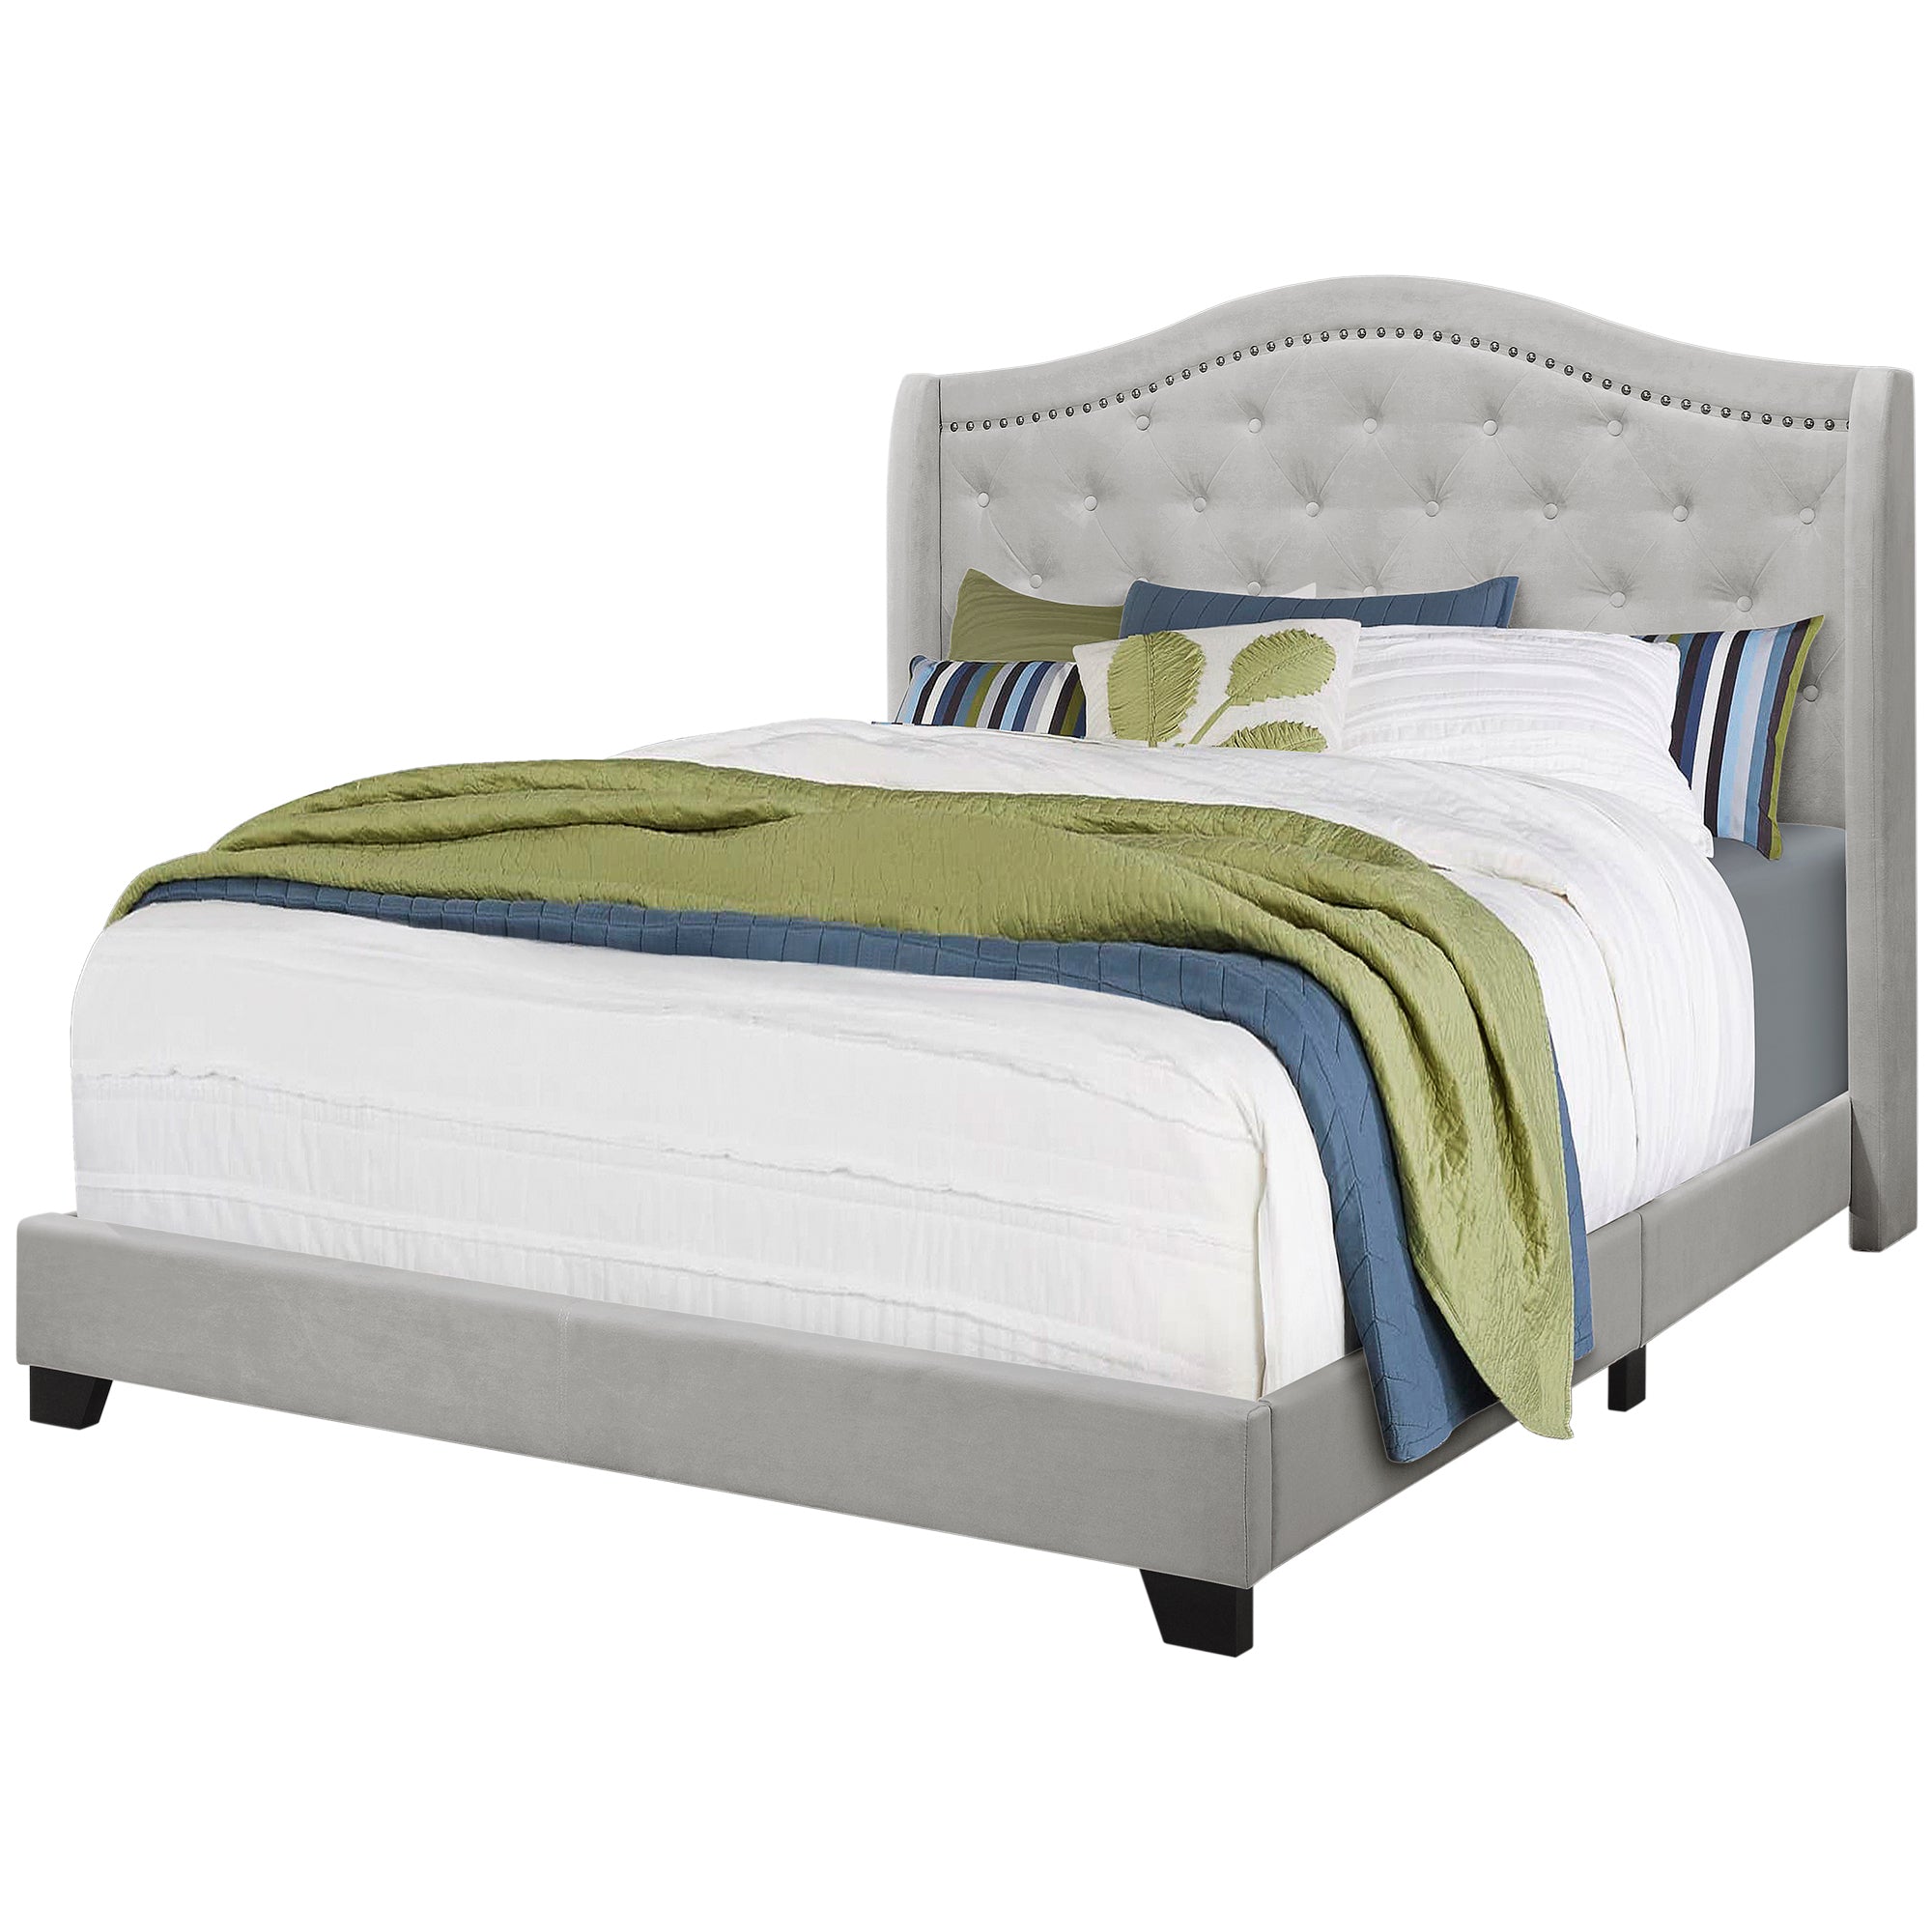 Bed - Queen Size / Light Grey Velvet With Chrome Trim